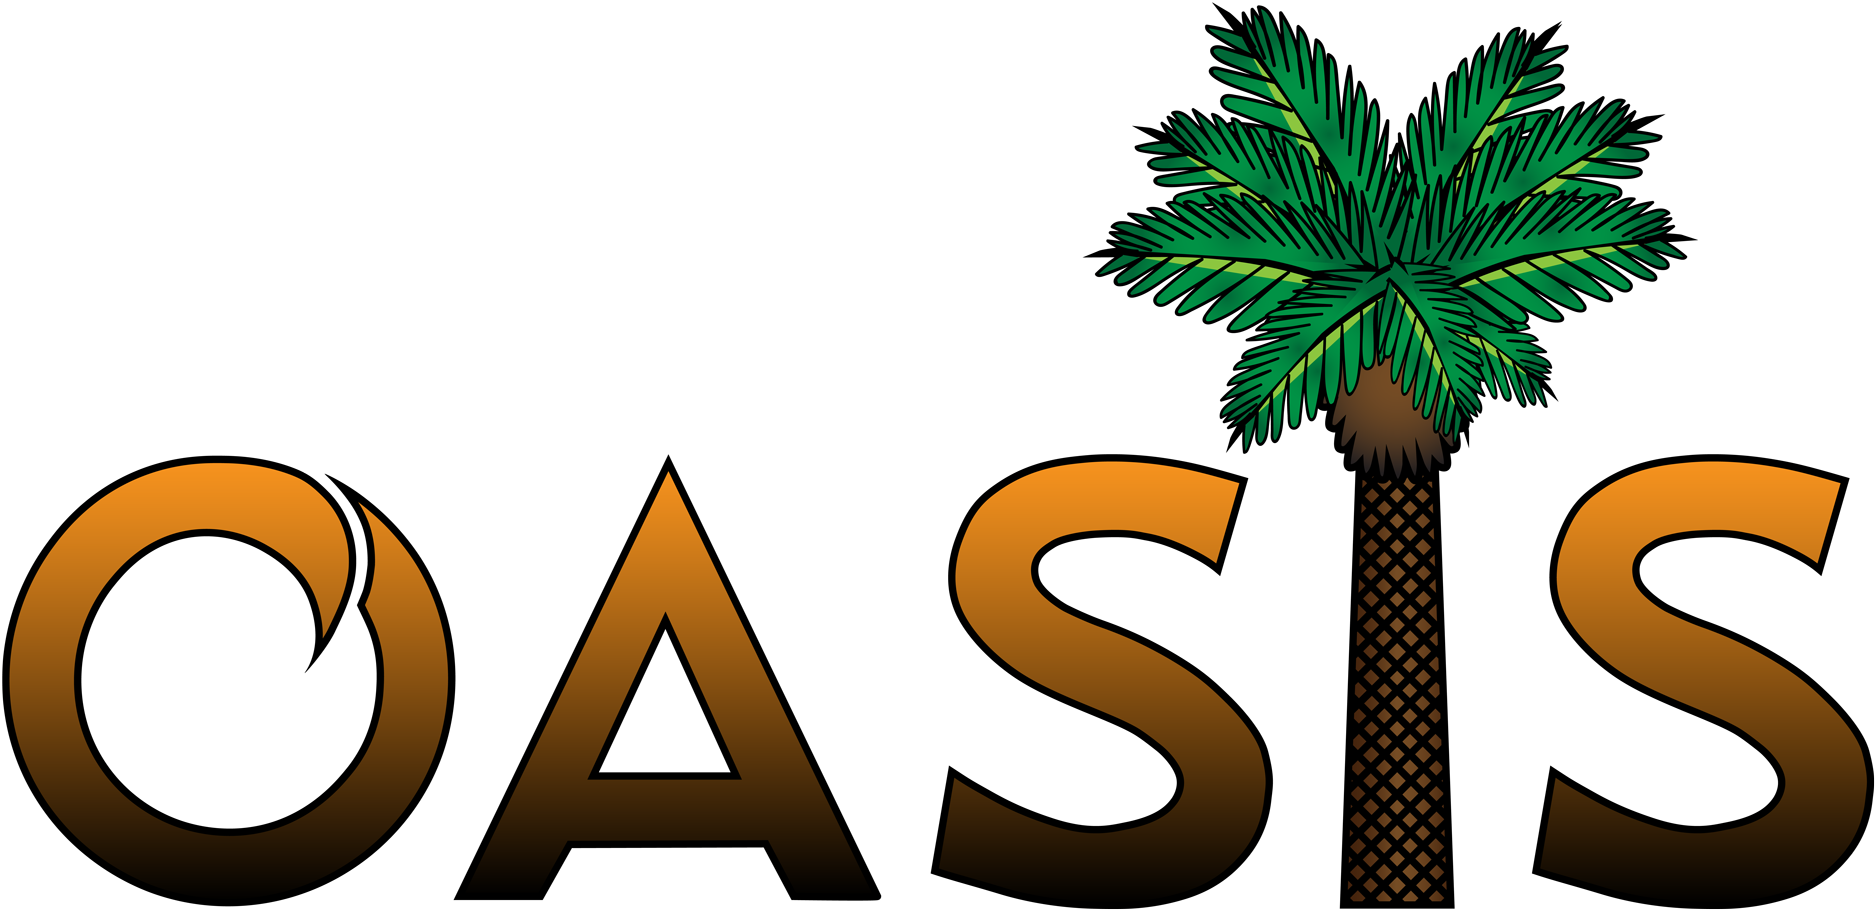 Oasis Logowith Palm Tree